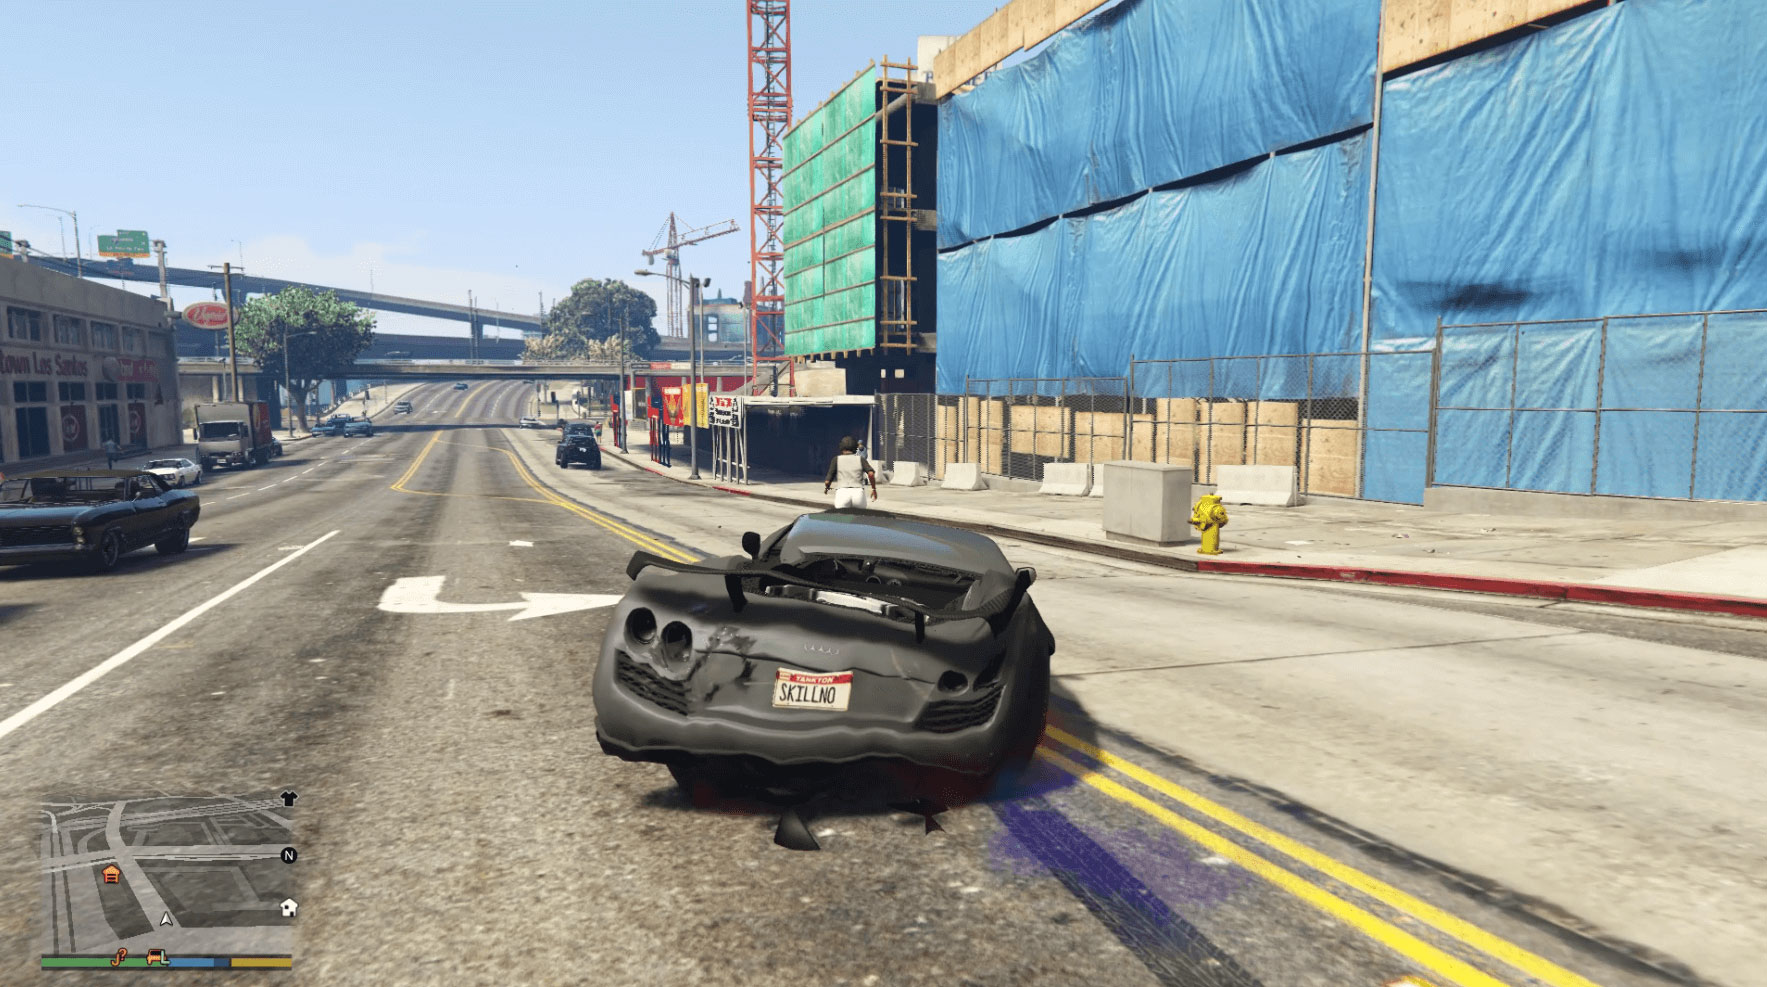 gta 5 build a mission mod not working